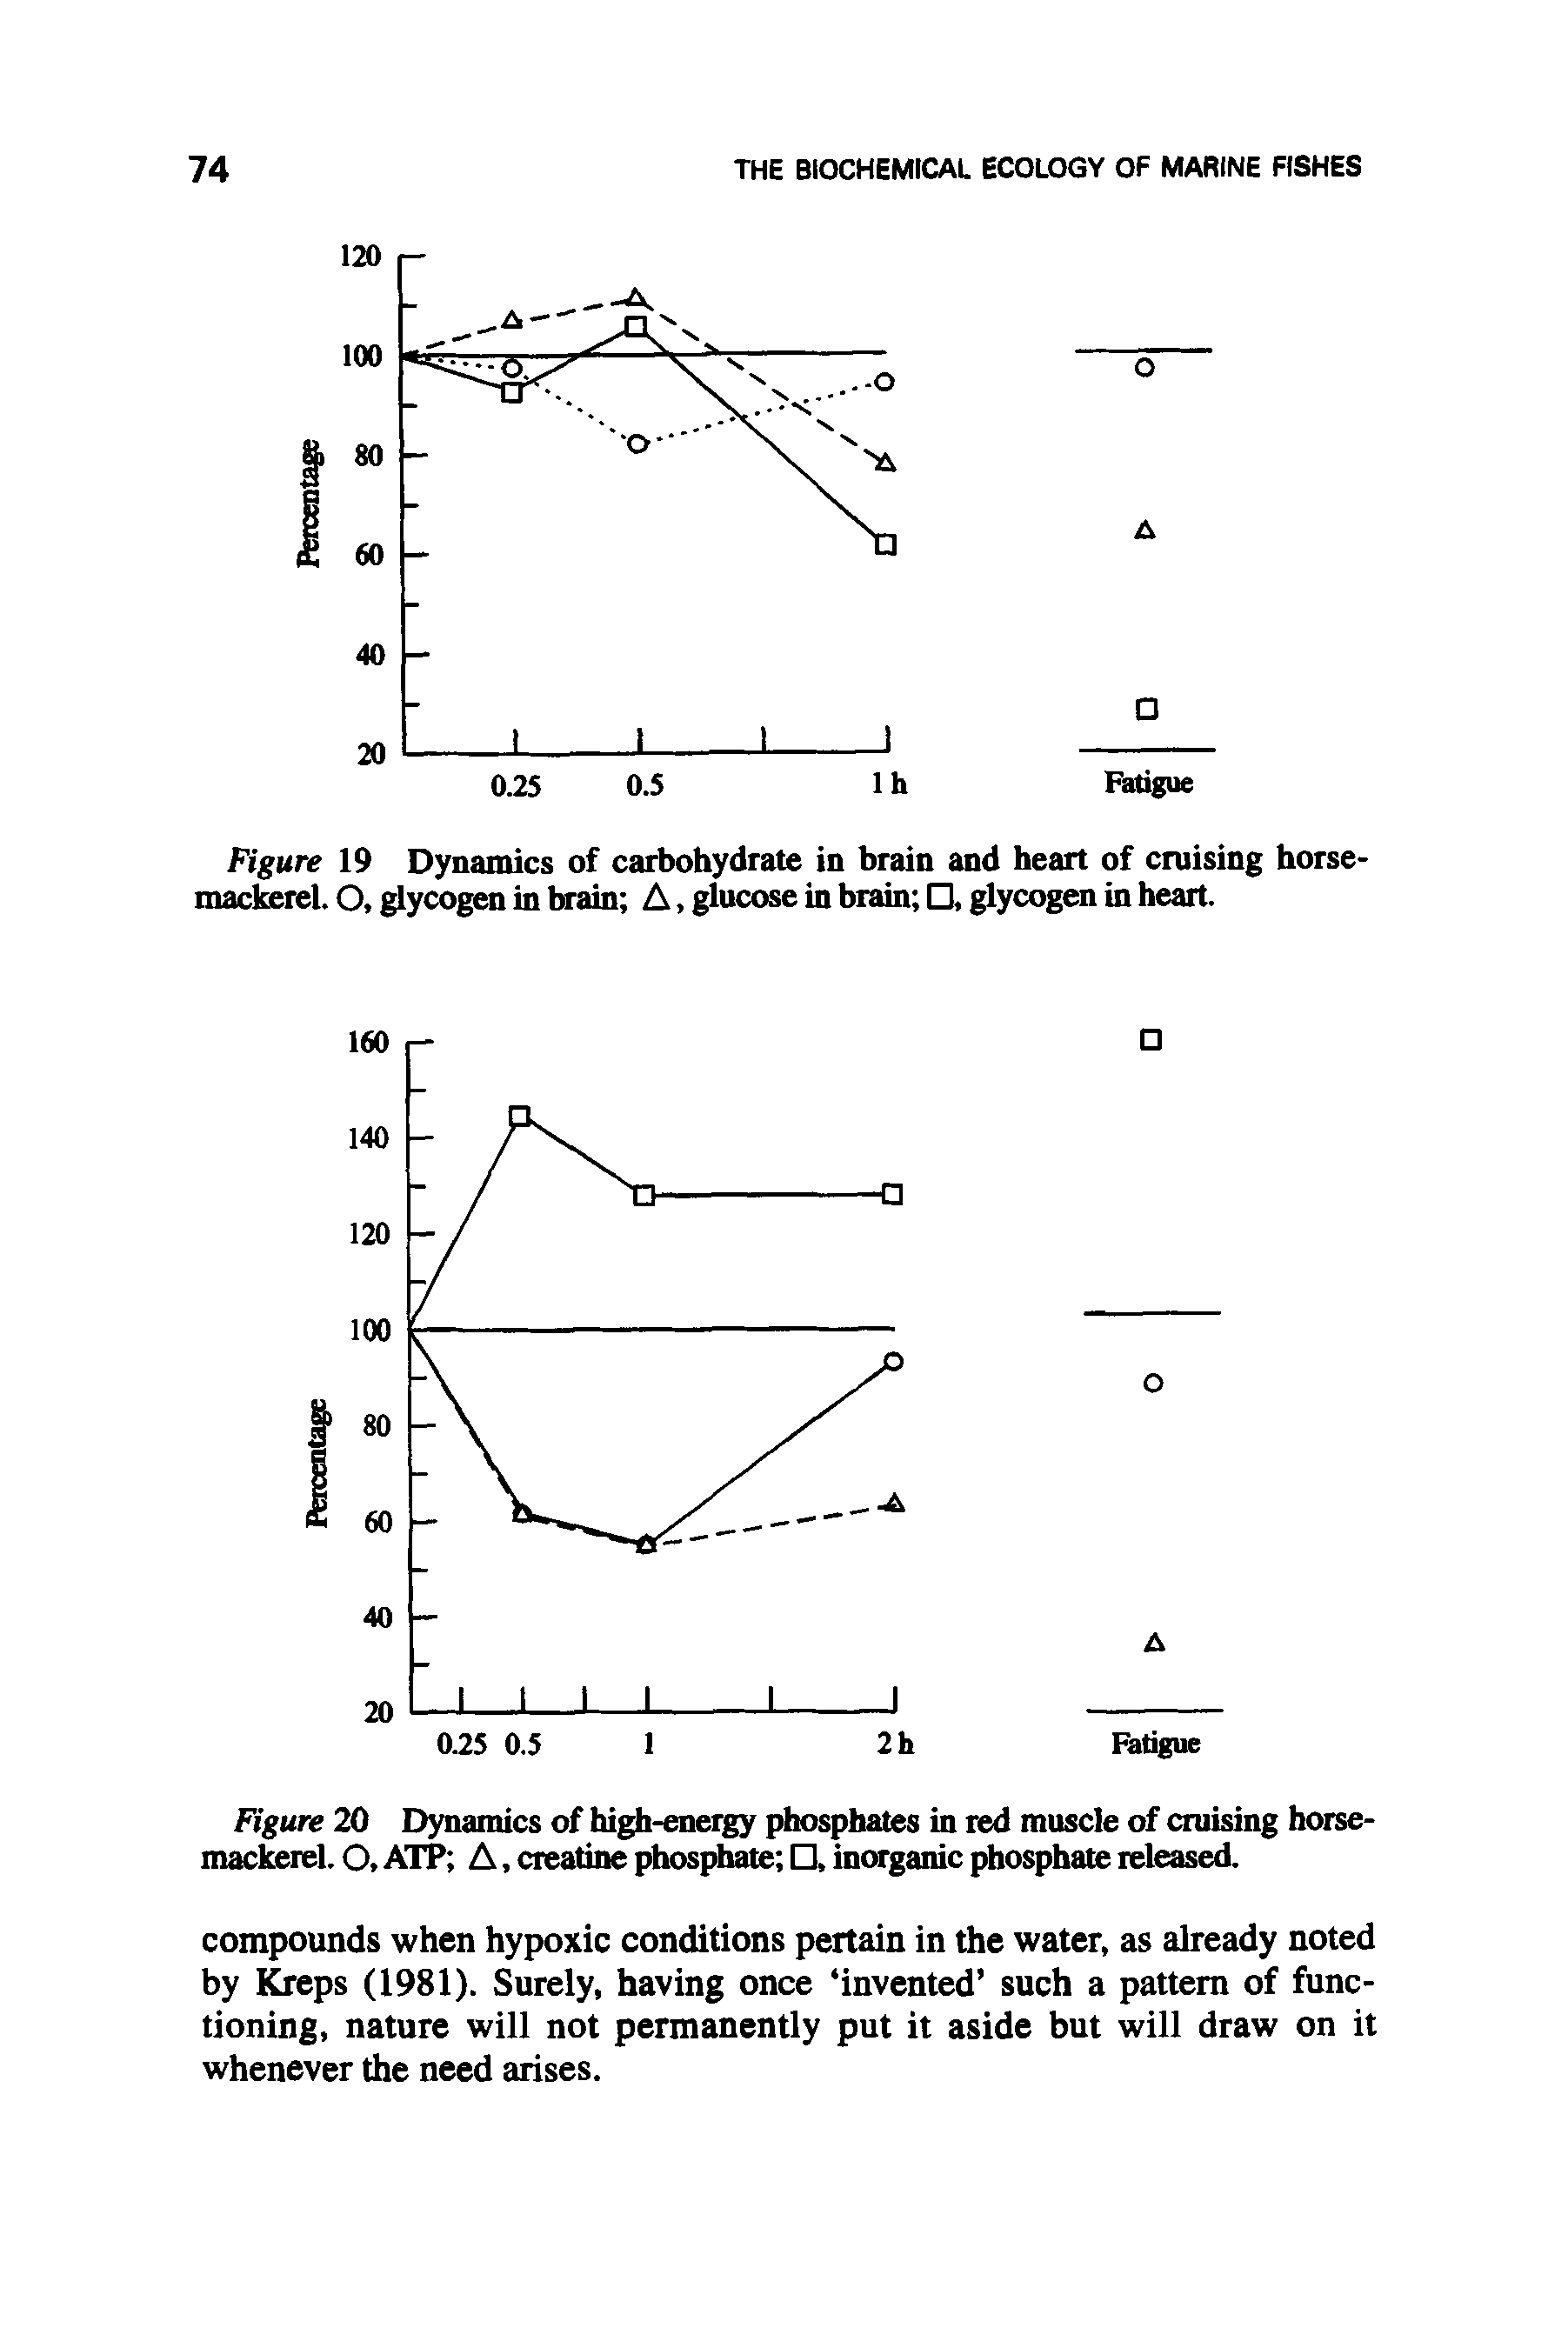 Figure 19 Dynamics of carbohydrate in brain and heart of cruising horse-mackerel. O, glycogen in brain A, glucose in brain , glycogen in heart.